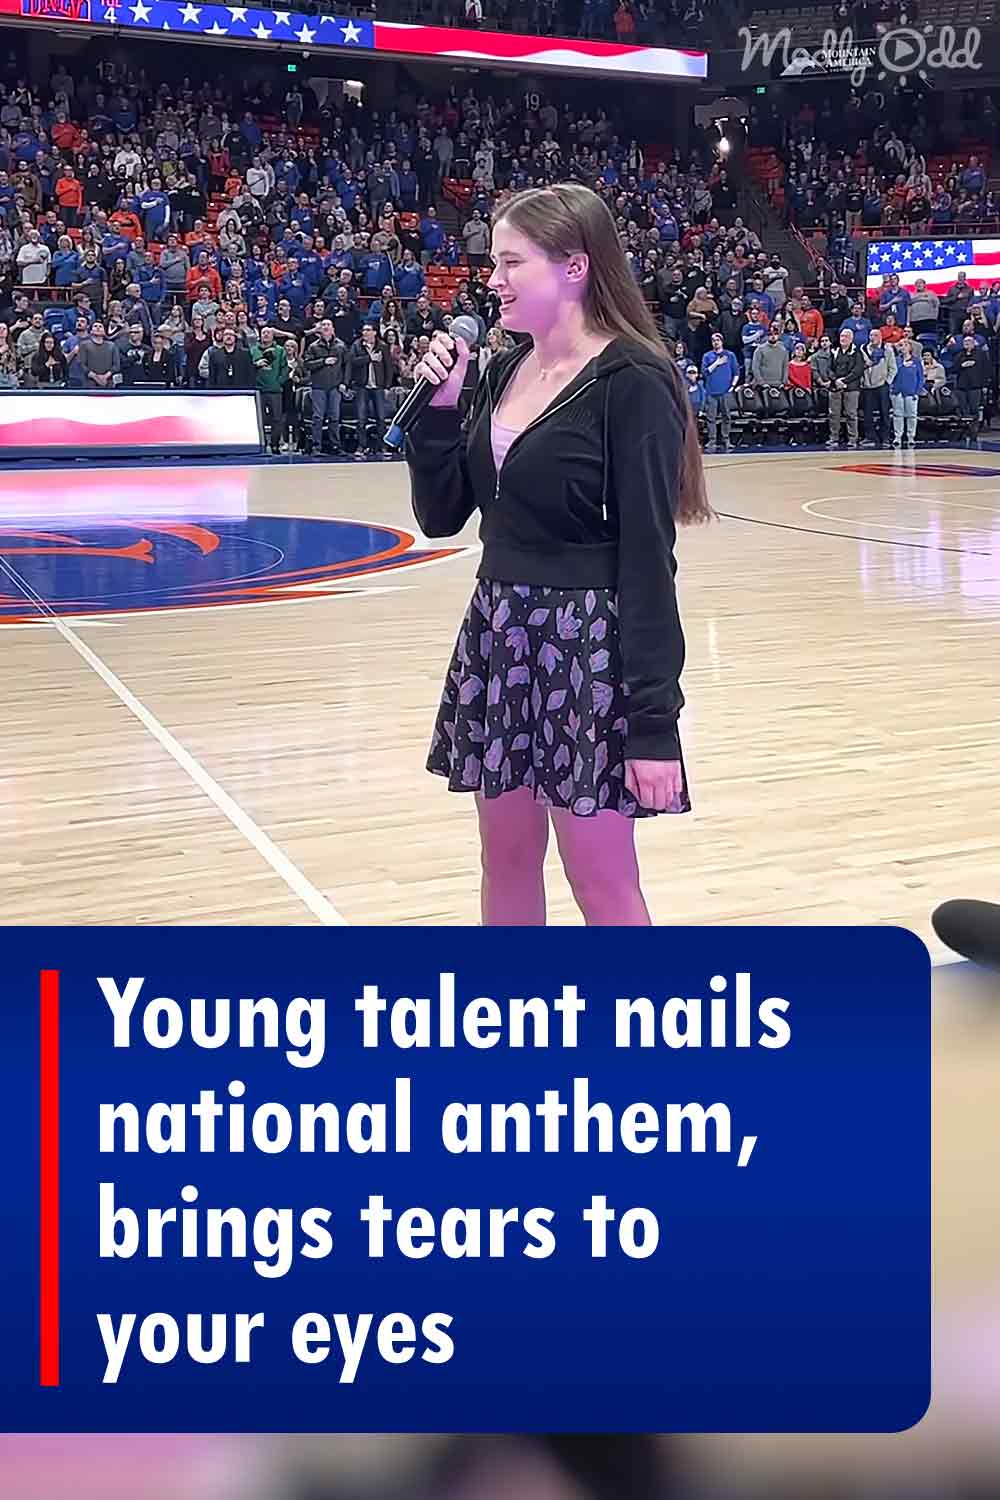 Young talent nails national anthem, brings tears to your eyes